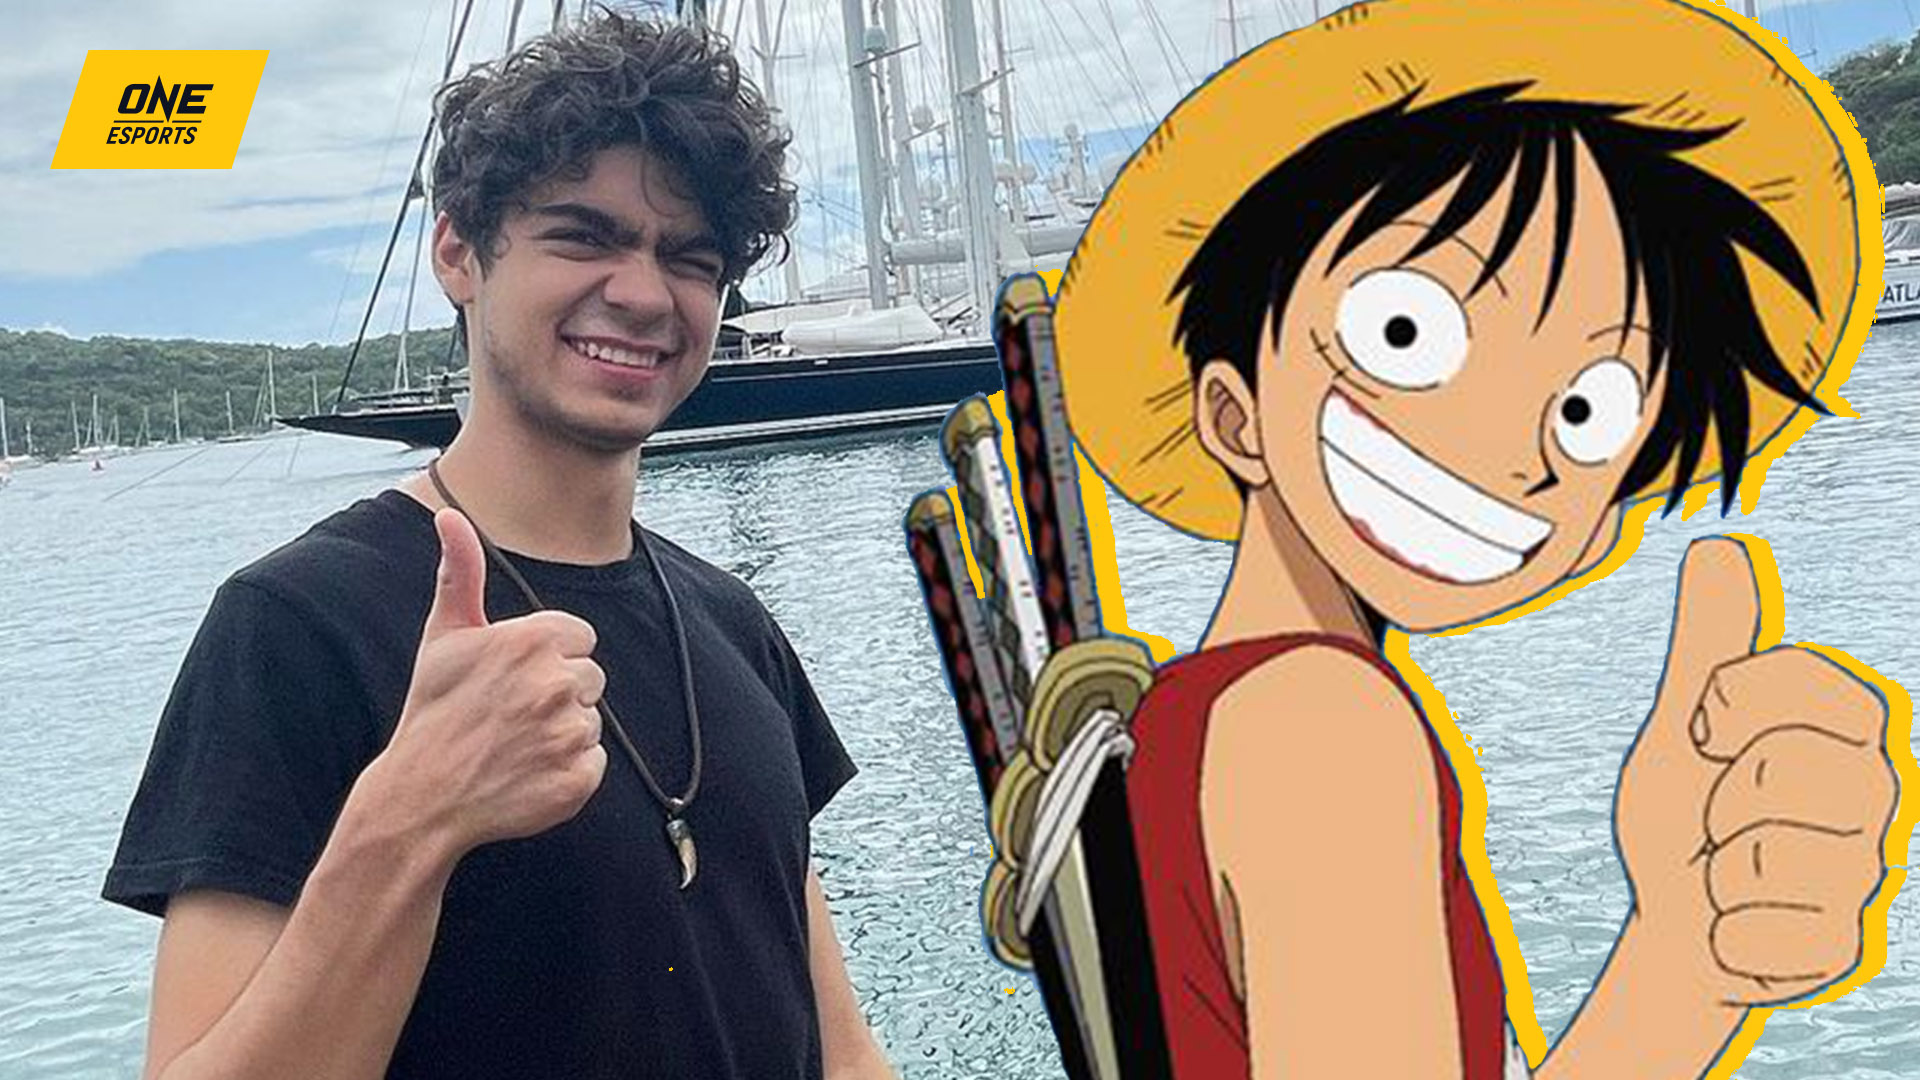 Netflix's One Piece live-action: Cast, trailer, release date | ONE Esports